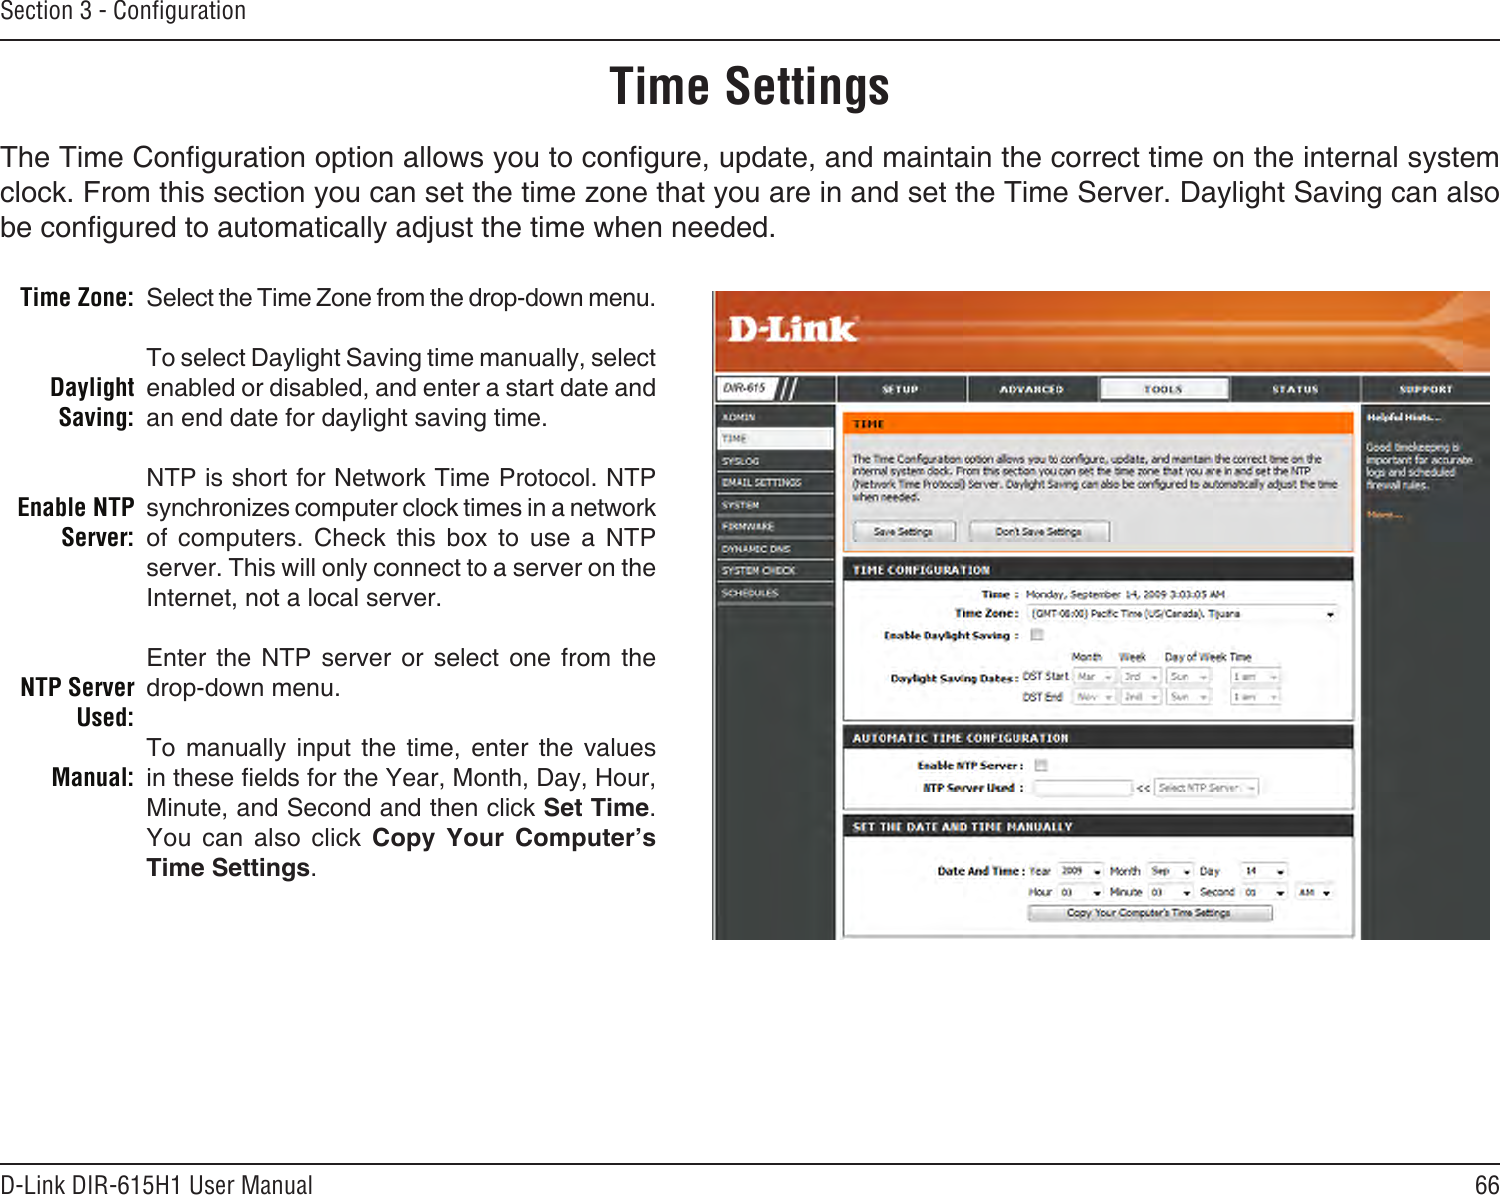 66D-Link DIR-615H1 User ManualSection 3 - CongurationTime SettingsSelect the Time Zone from the drop-down menu.To select Daylight Saving time manually, select enabled or disabled, and enter a start date and an end date for daylight saving time.NTP is short for Network Time Protocol. NTP synchronizes computer clock times in a network of  computers.  Check  this  box  to  use  a  NTP server. This will only connect to a server on the Internet, not a local server.Enter  the  NTP  server  or  select  one  from  the drop-down menu.To  manually  input  the  time,  enter  the  values in these elds for the Year, Month, Day, Hour, Minute, and Second and then click Set Time. You  can  also  click  Copy  Your  Computer’s Time Settings.Time Zone:Daylight Saving:Enable NTP Server:NTP Server Used:Manual:The Time Conguration option allows you to congure, update, and maintain the correct time on the internal system clock. From this section you can set the time zone that you are in and set the Time Server. Daylight Saving can also be congured to automatically adjust the time when needed.